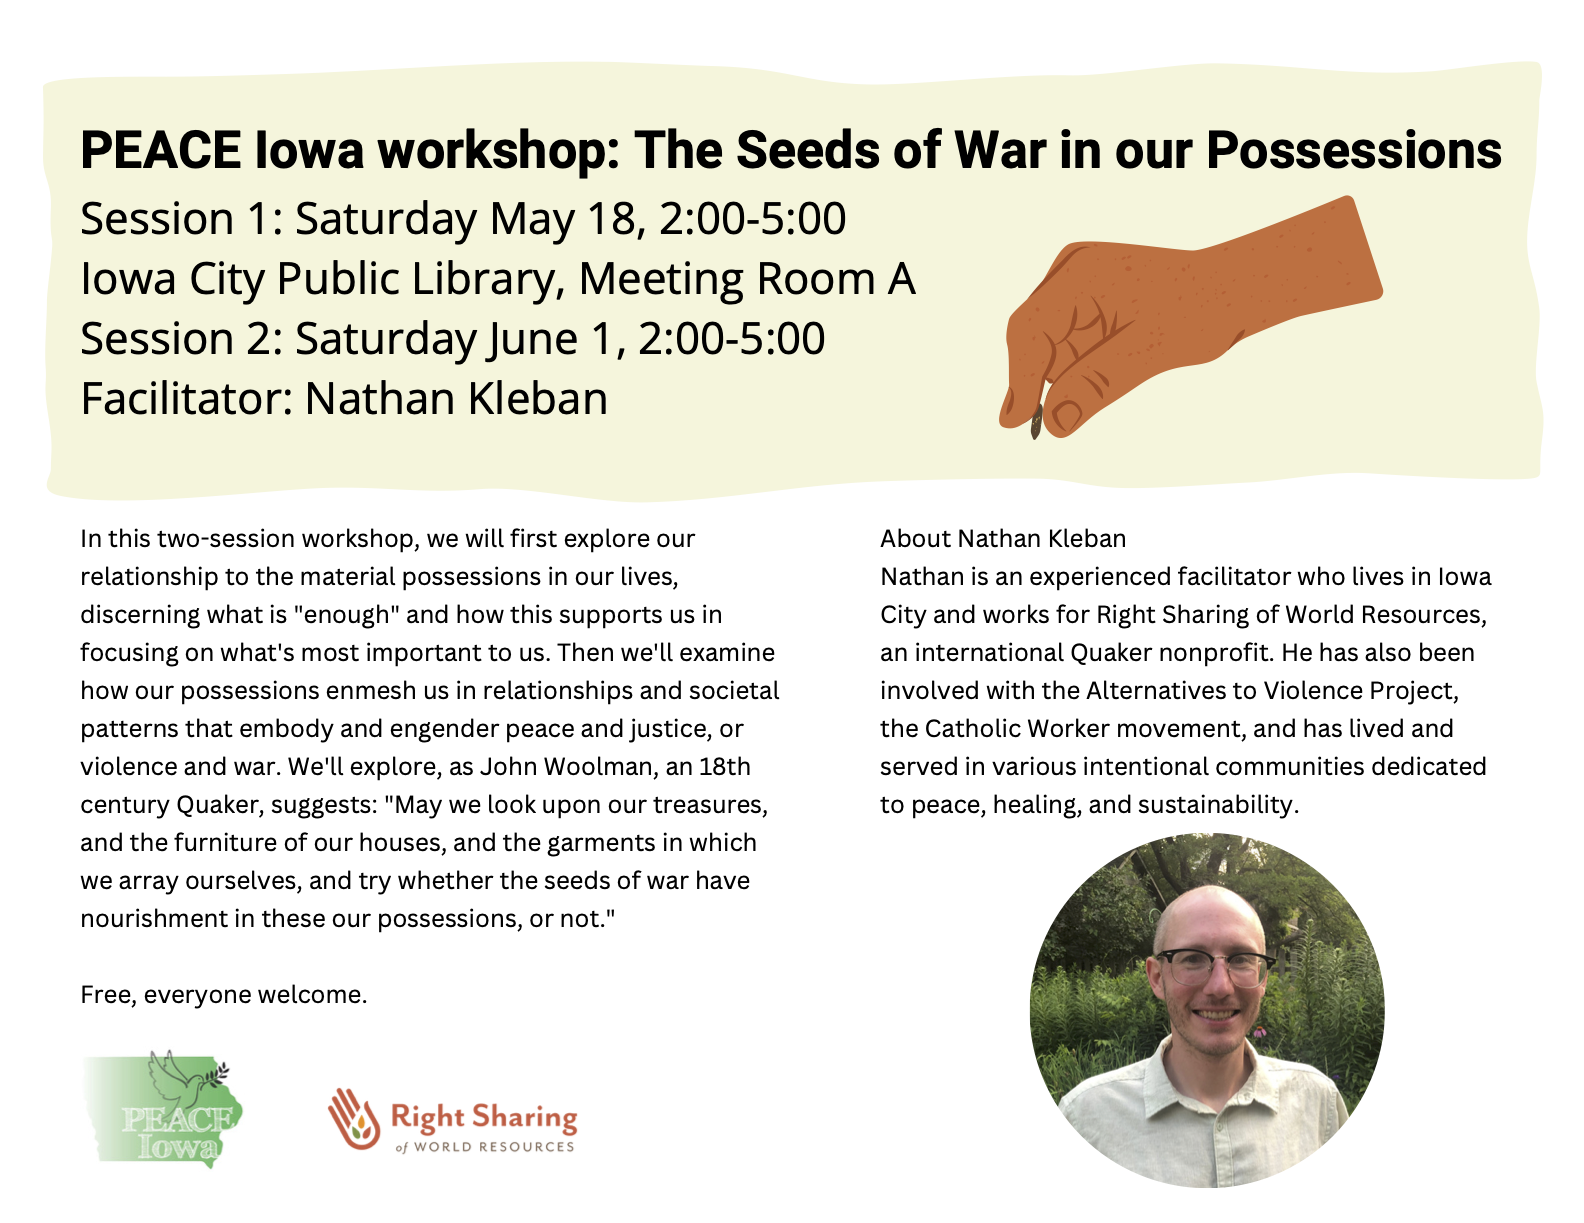 PEACE Iowa workshop: The Seeds of War in our Possessions.
Session 1: Saturday May 18, 2:00-5:00.
Iowa City Public Library, Meeting Room A.
Session 2: Saturday June 1, 2:00-5:00.
Facilitator: Nathan Kleban.

In this two-session workshop, we will first explore our relationship to the material possessions in our lives, discerning what is "enough" and how this supports us in focusing on what's most important to us. Then we'll examine how our possessions enmesh us in relationships and societal patterns that embody and engender peace and justice, or violence and war. We'll explore, as John Woolman, an 18th century Quaker, suggests: "May we look upon our treasures, and the furniture of our houses, and the garments in which we array ourselves, and try whether the seeds of war have nourishment in these our possessions, or not."

Free, everyone welcome.
Sponsored by PEACE Iowa and Right Sharing of World Resources.

About Nathan Kleban
Nathan is an experienced facilitator who lives in Iowa
City and works for Right Sharing of World Resources,
an international Quaker nonprofit. He has also been
involved with the Alternatives to Violence Project,
the Catholic Worker movement, and has lived and
served in various intentional communities dedicated
to peace, healing, and sustainability.